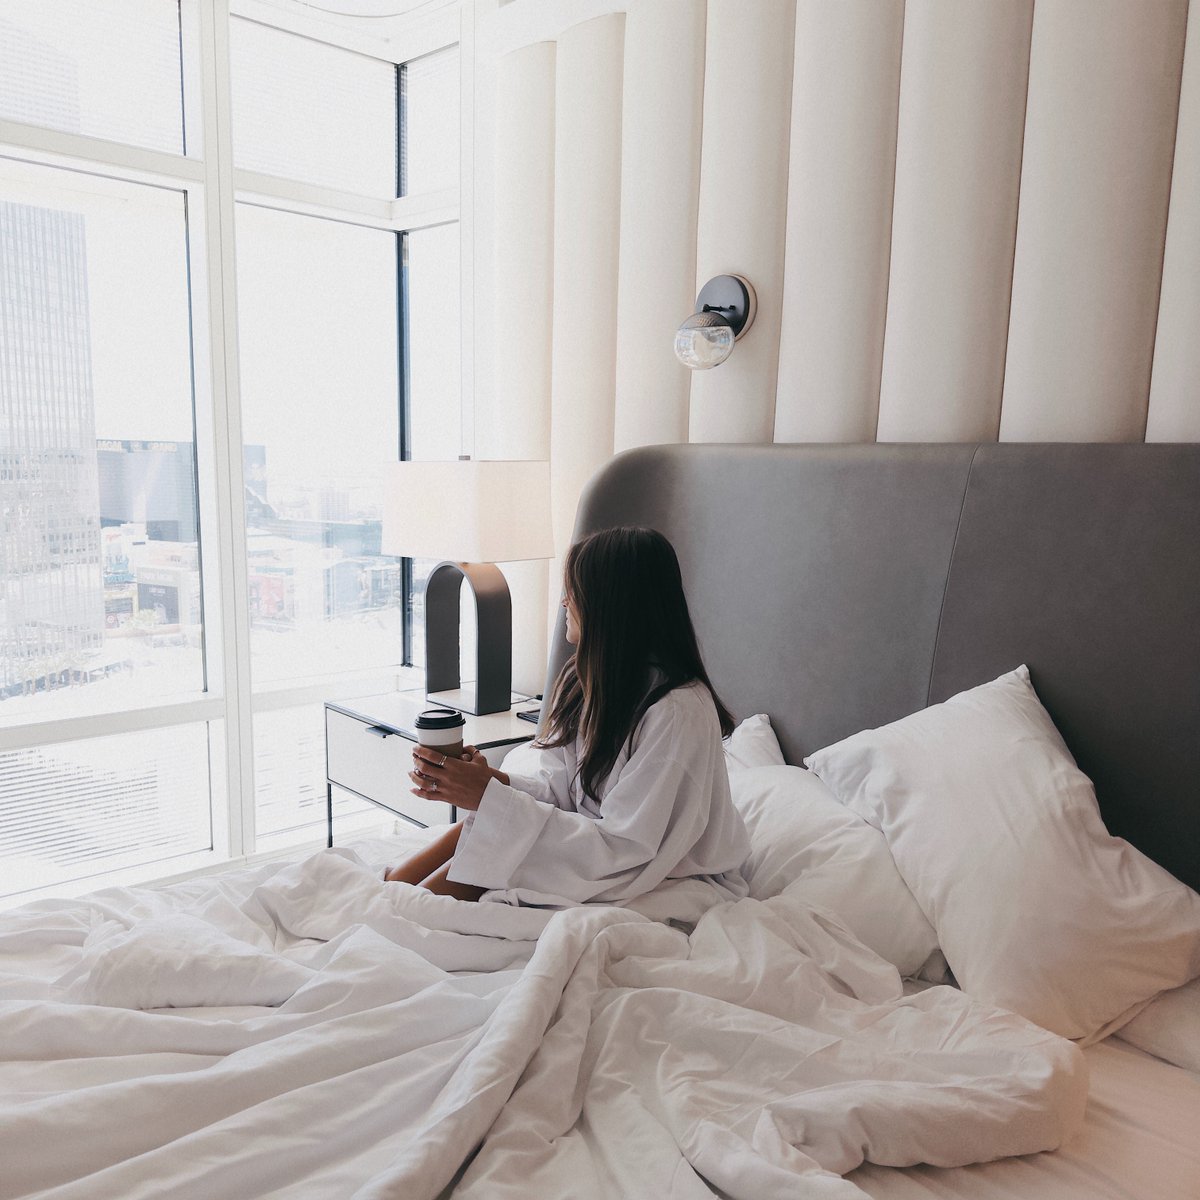 The gift of a luxurious vacation can be enjoyed from the comfort of your own home. Enjoy 15% off scents, bedding and more at Shop Aria: spr.ly/6019uvbOB Photo courtesy of @zackkalter